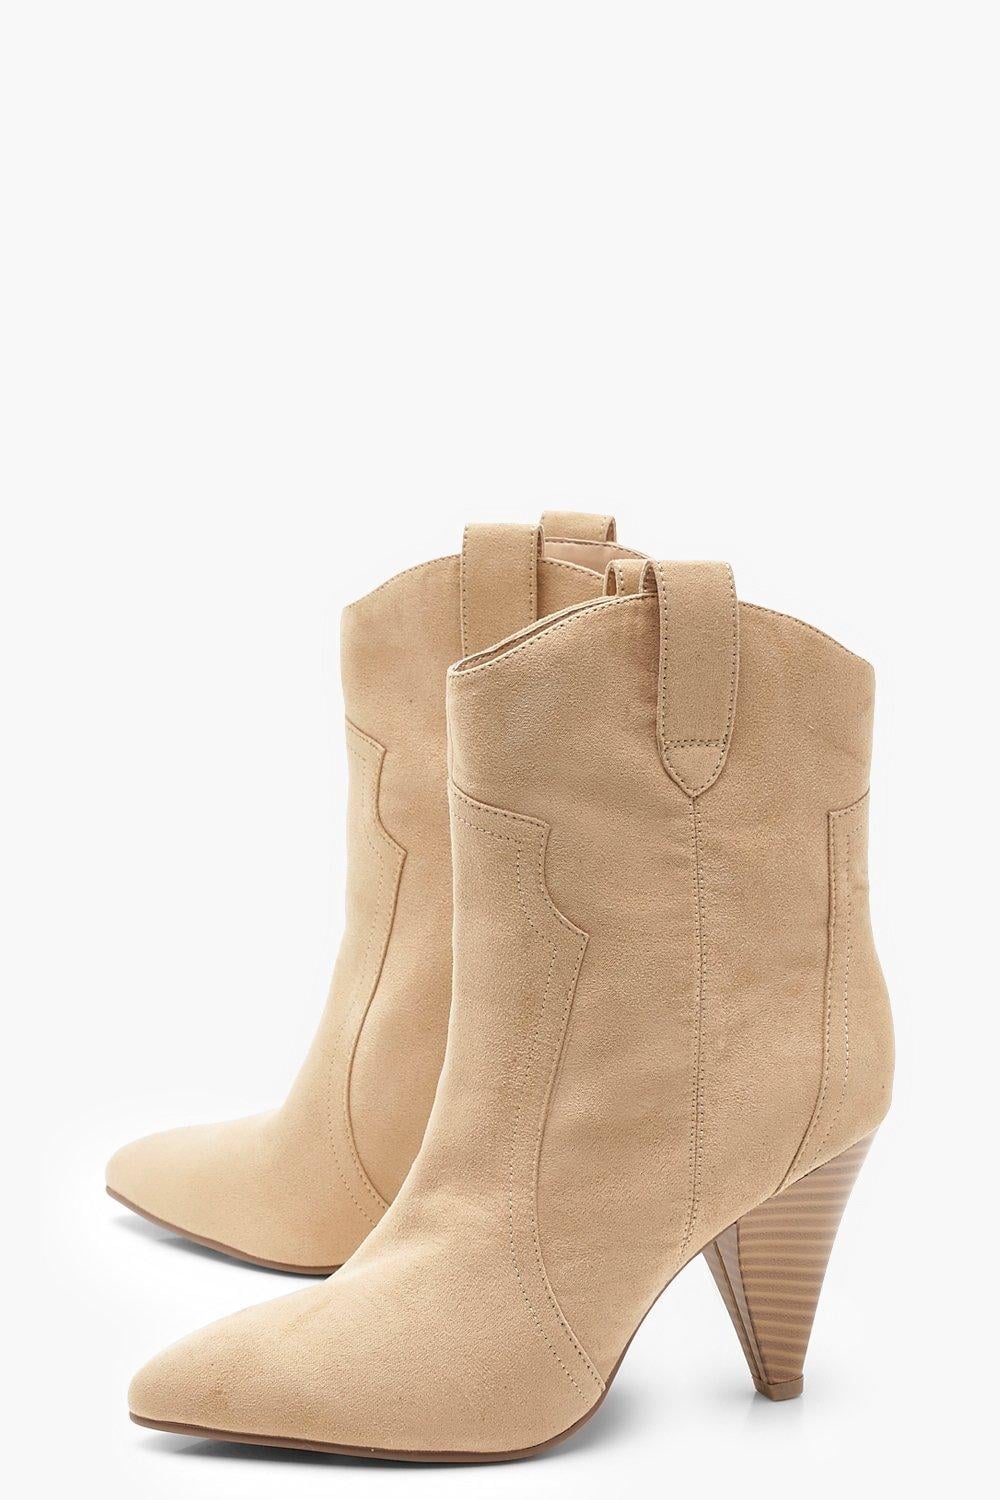 Boohoo Pull On Western Boots | The 1 